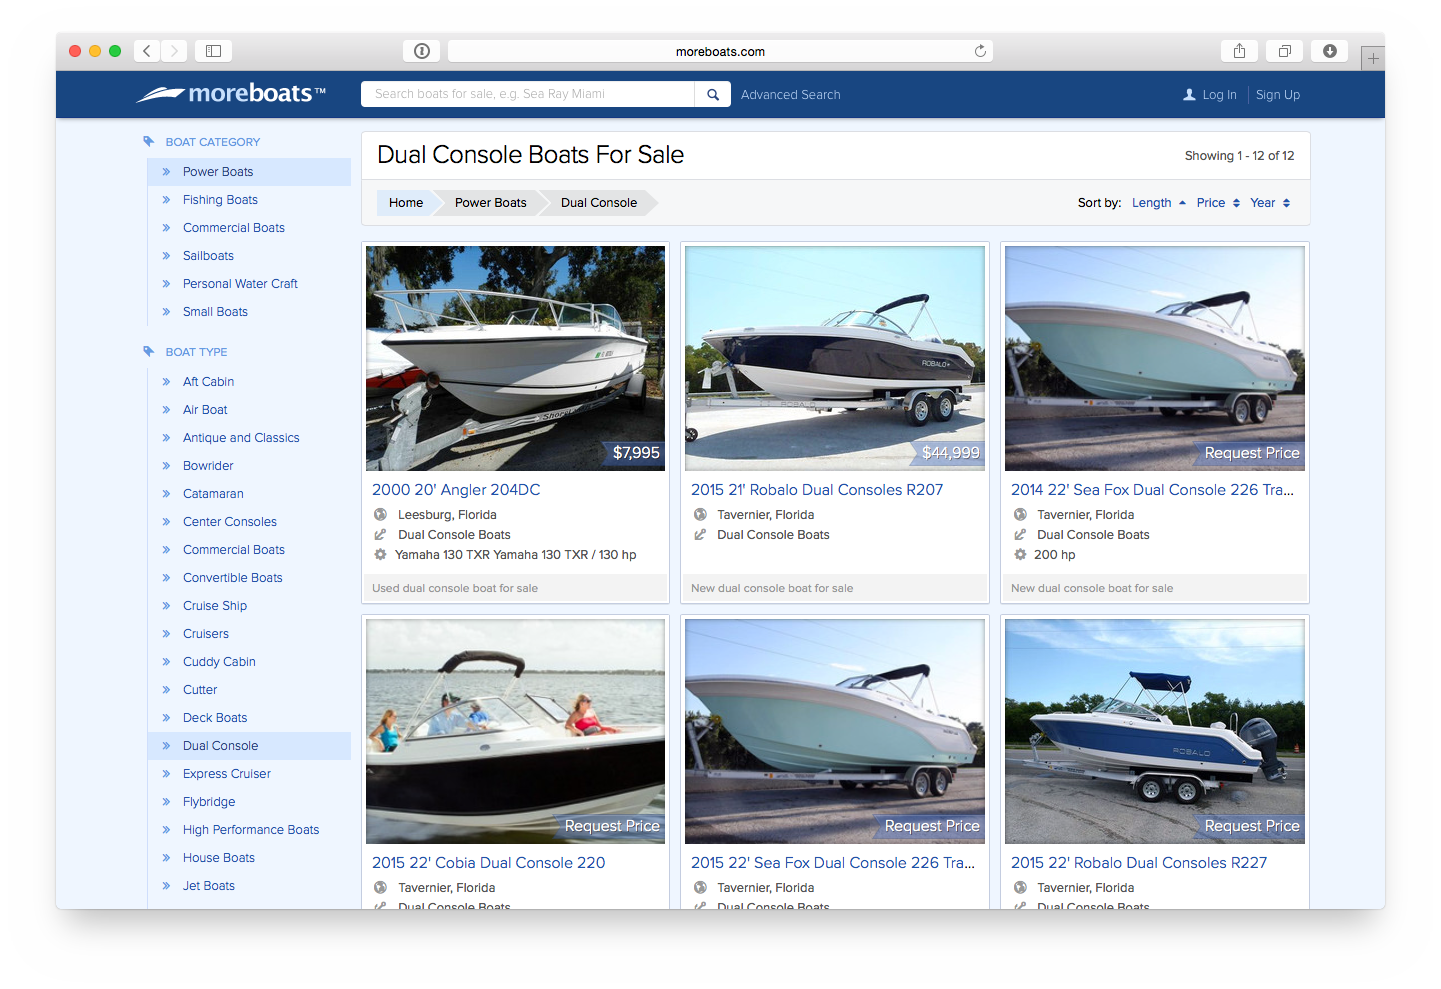 Moreboats.com Search Results